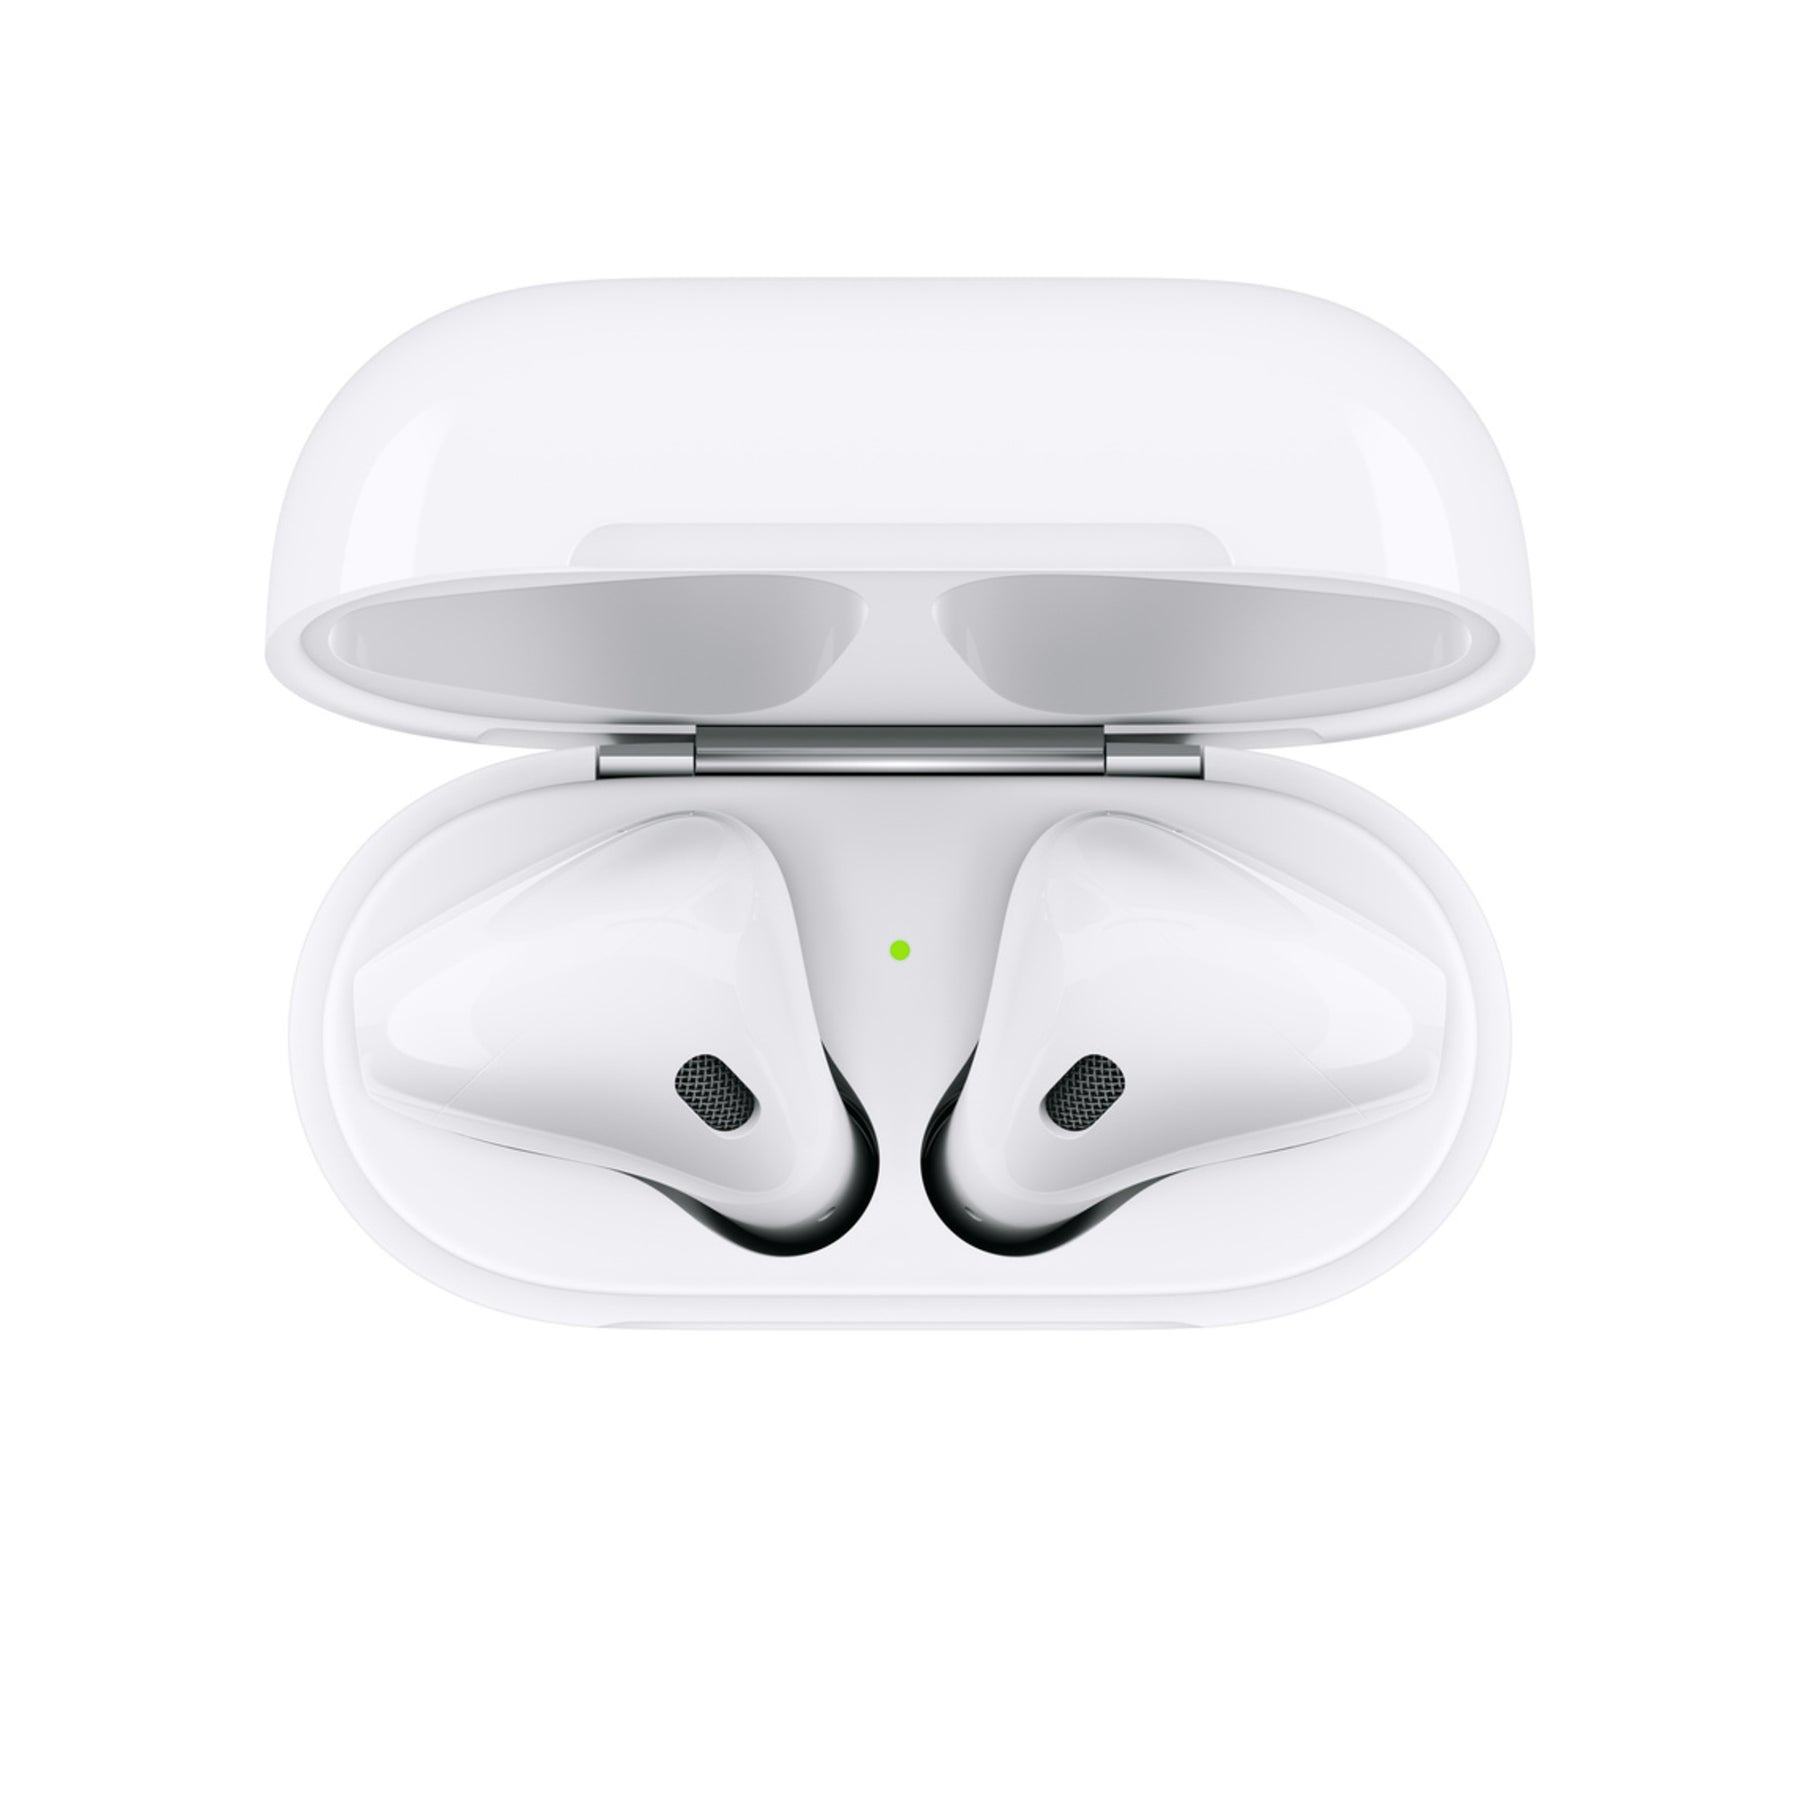 Apple AirPods (第 2 代)